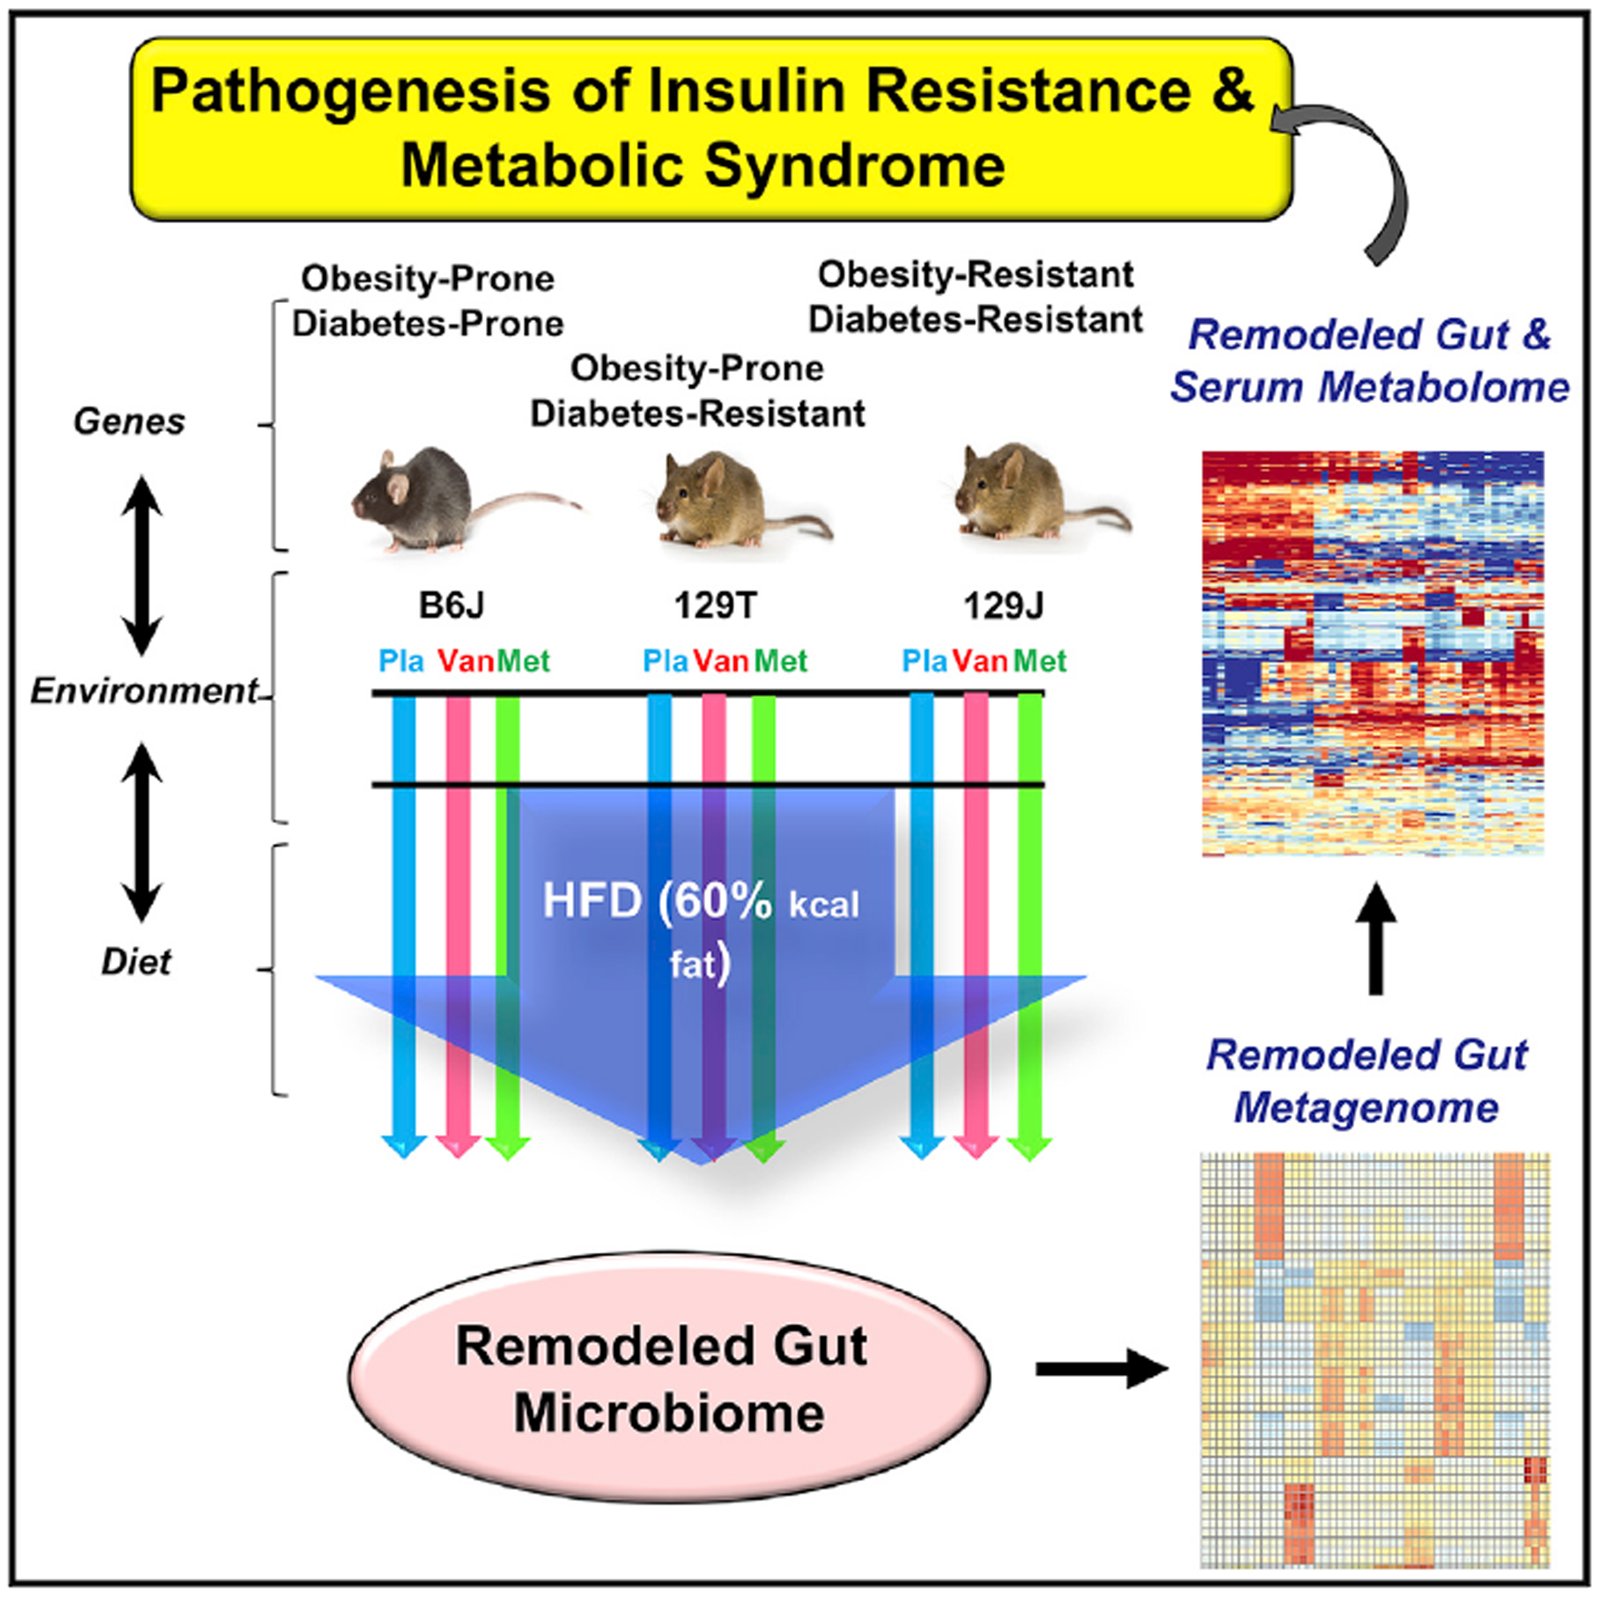 Diet Genetics and the Gut Microbiome Drive Dynamic Changes in Plasma Metabolites